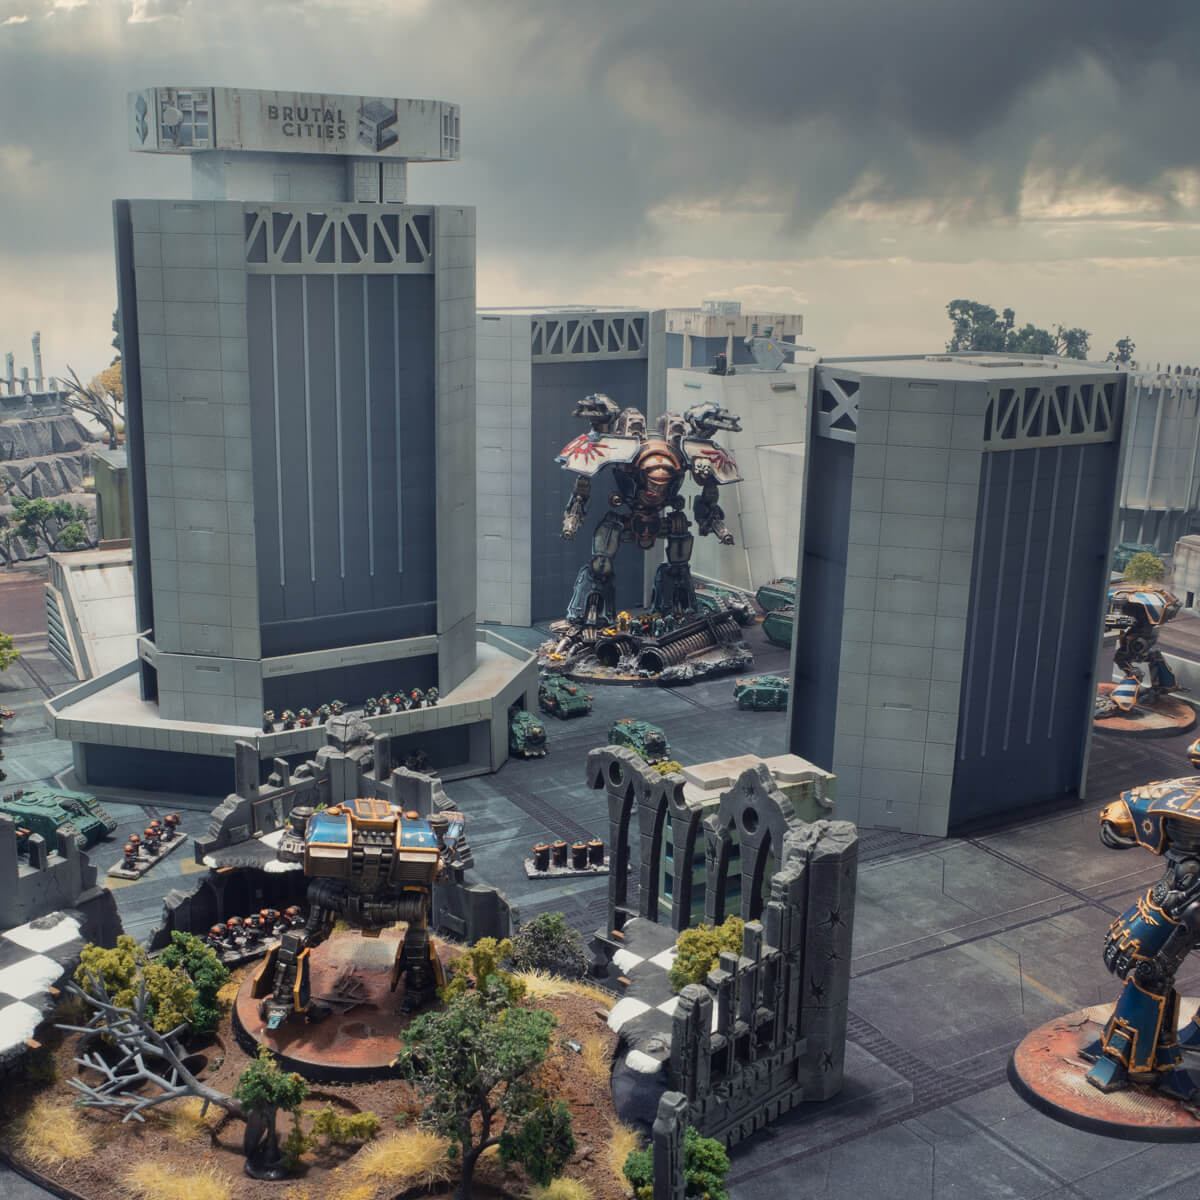 Large Epic 40k / Legions Imperialis brutalist skyscrapers with titans and space marines for scale. A gothic ruin building is in the foreground and a stormy sky in the background.